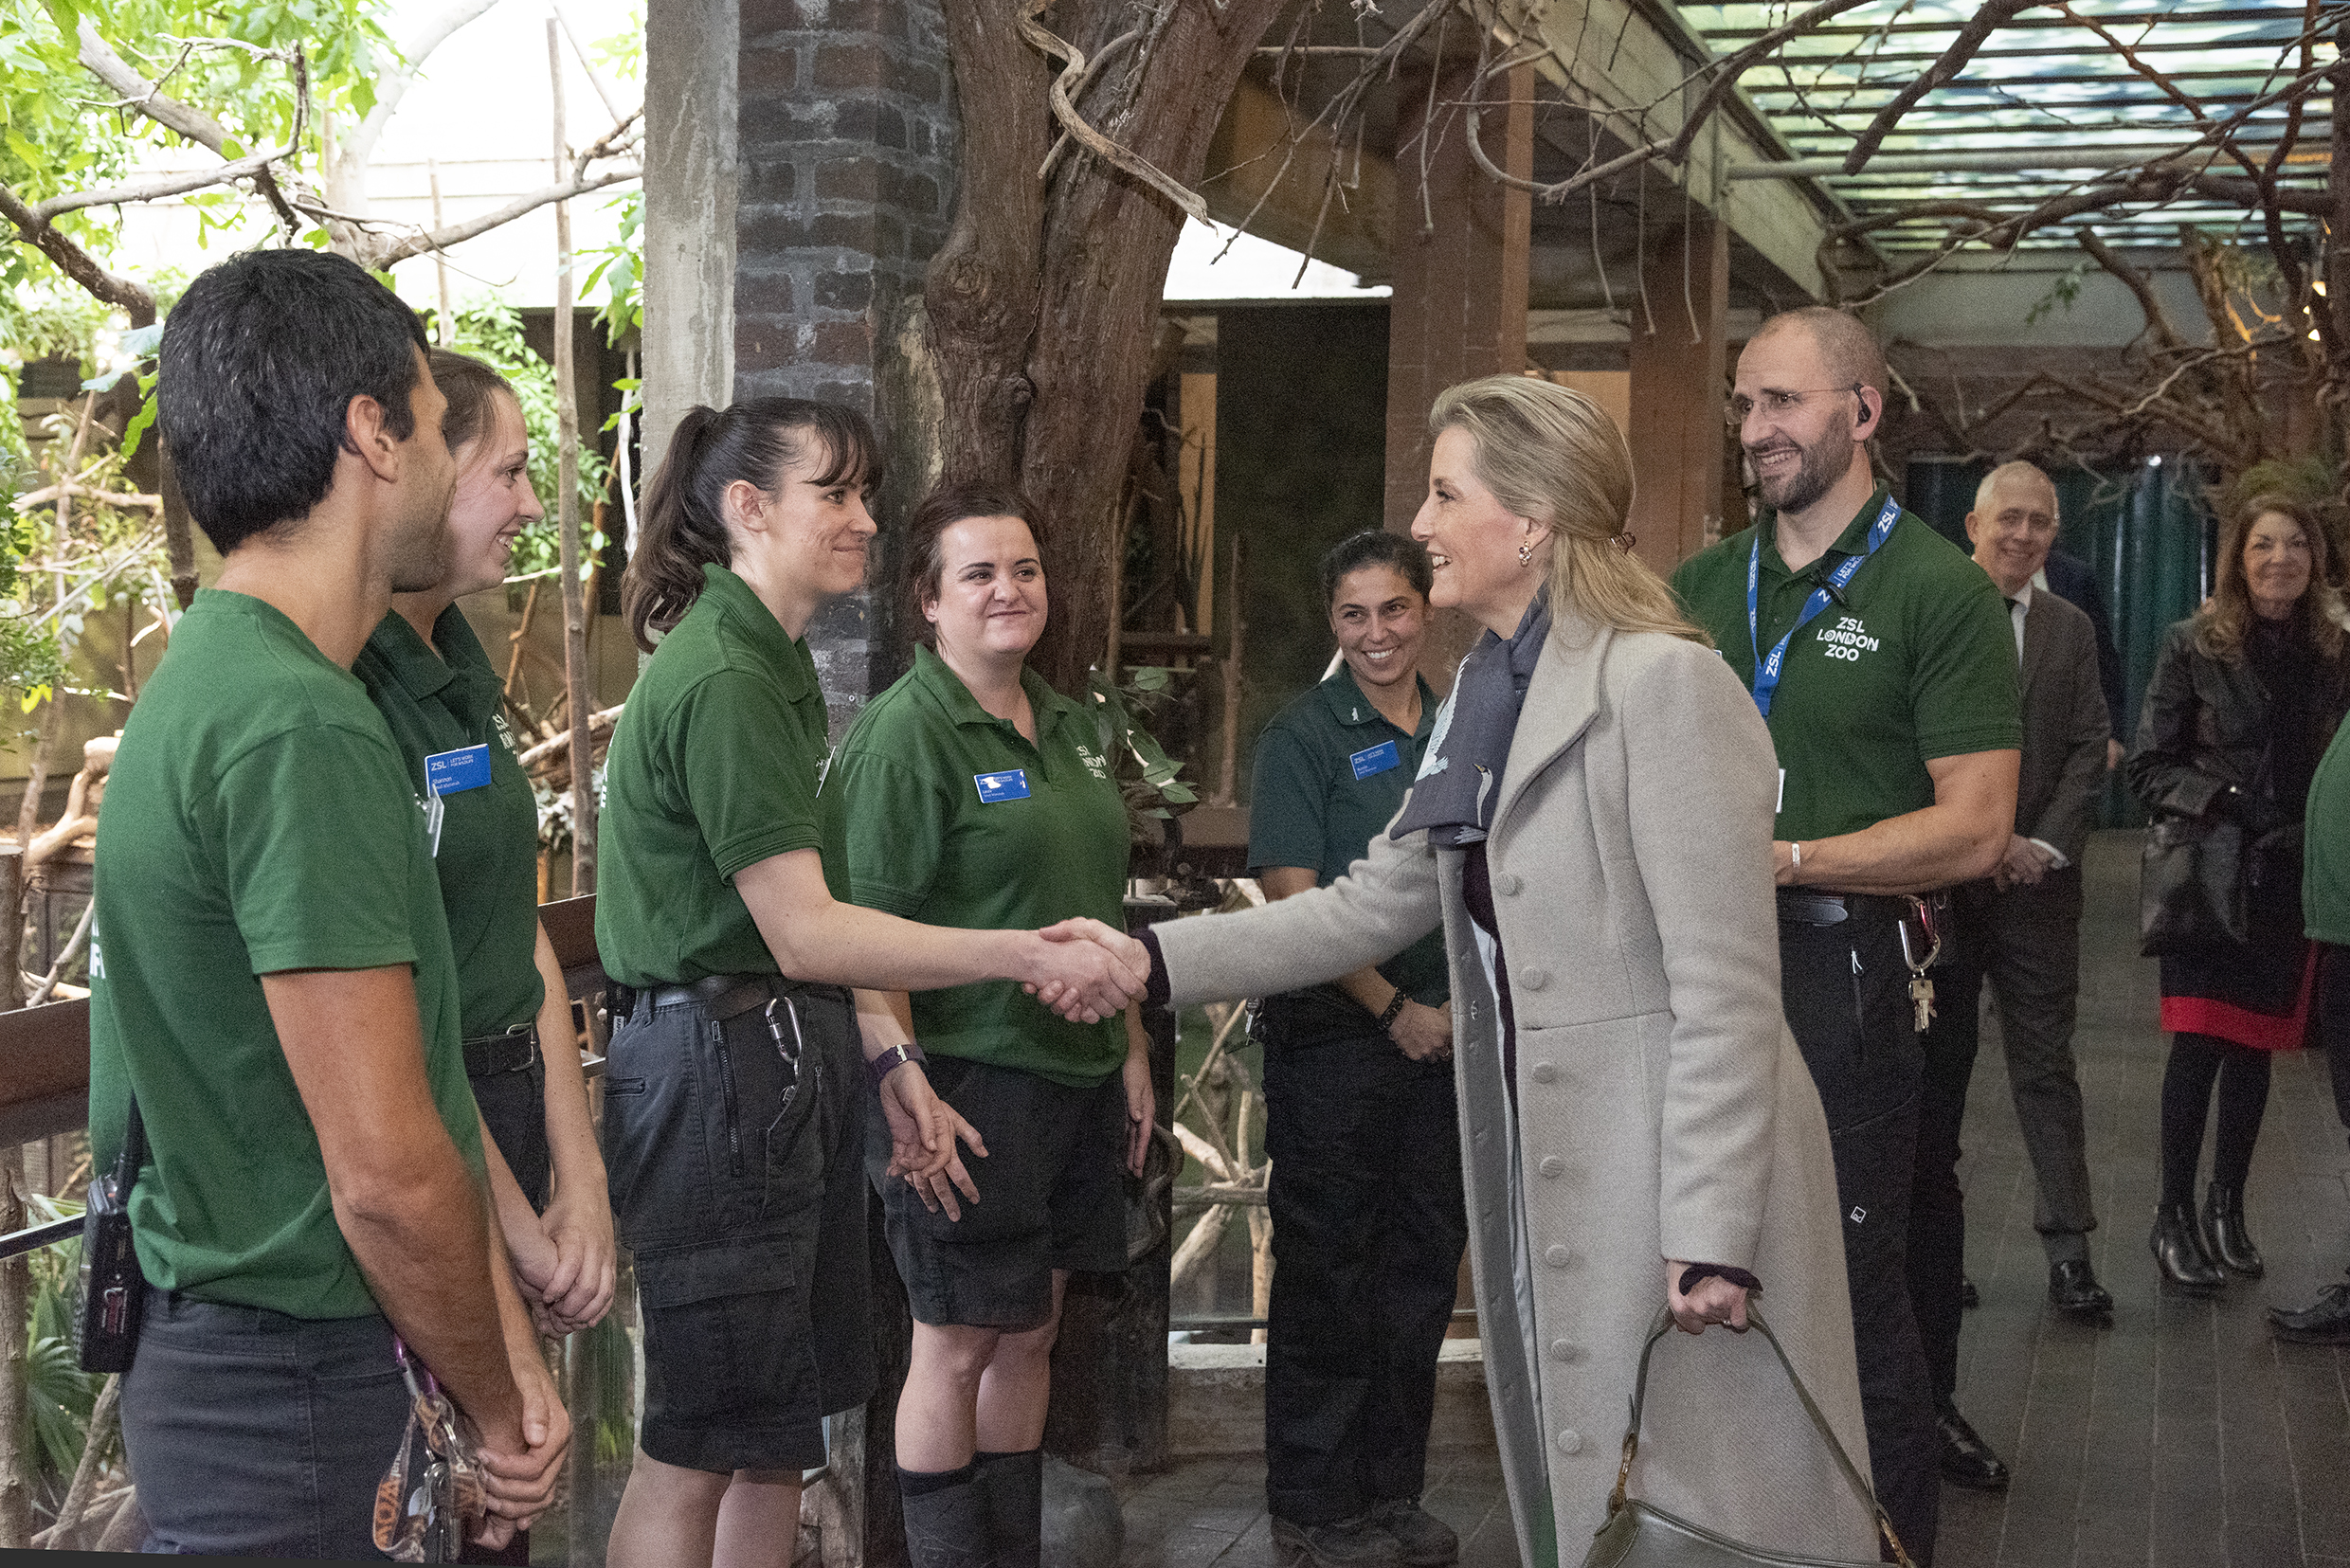 She also met zookeepers (ZSL)